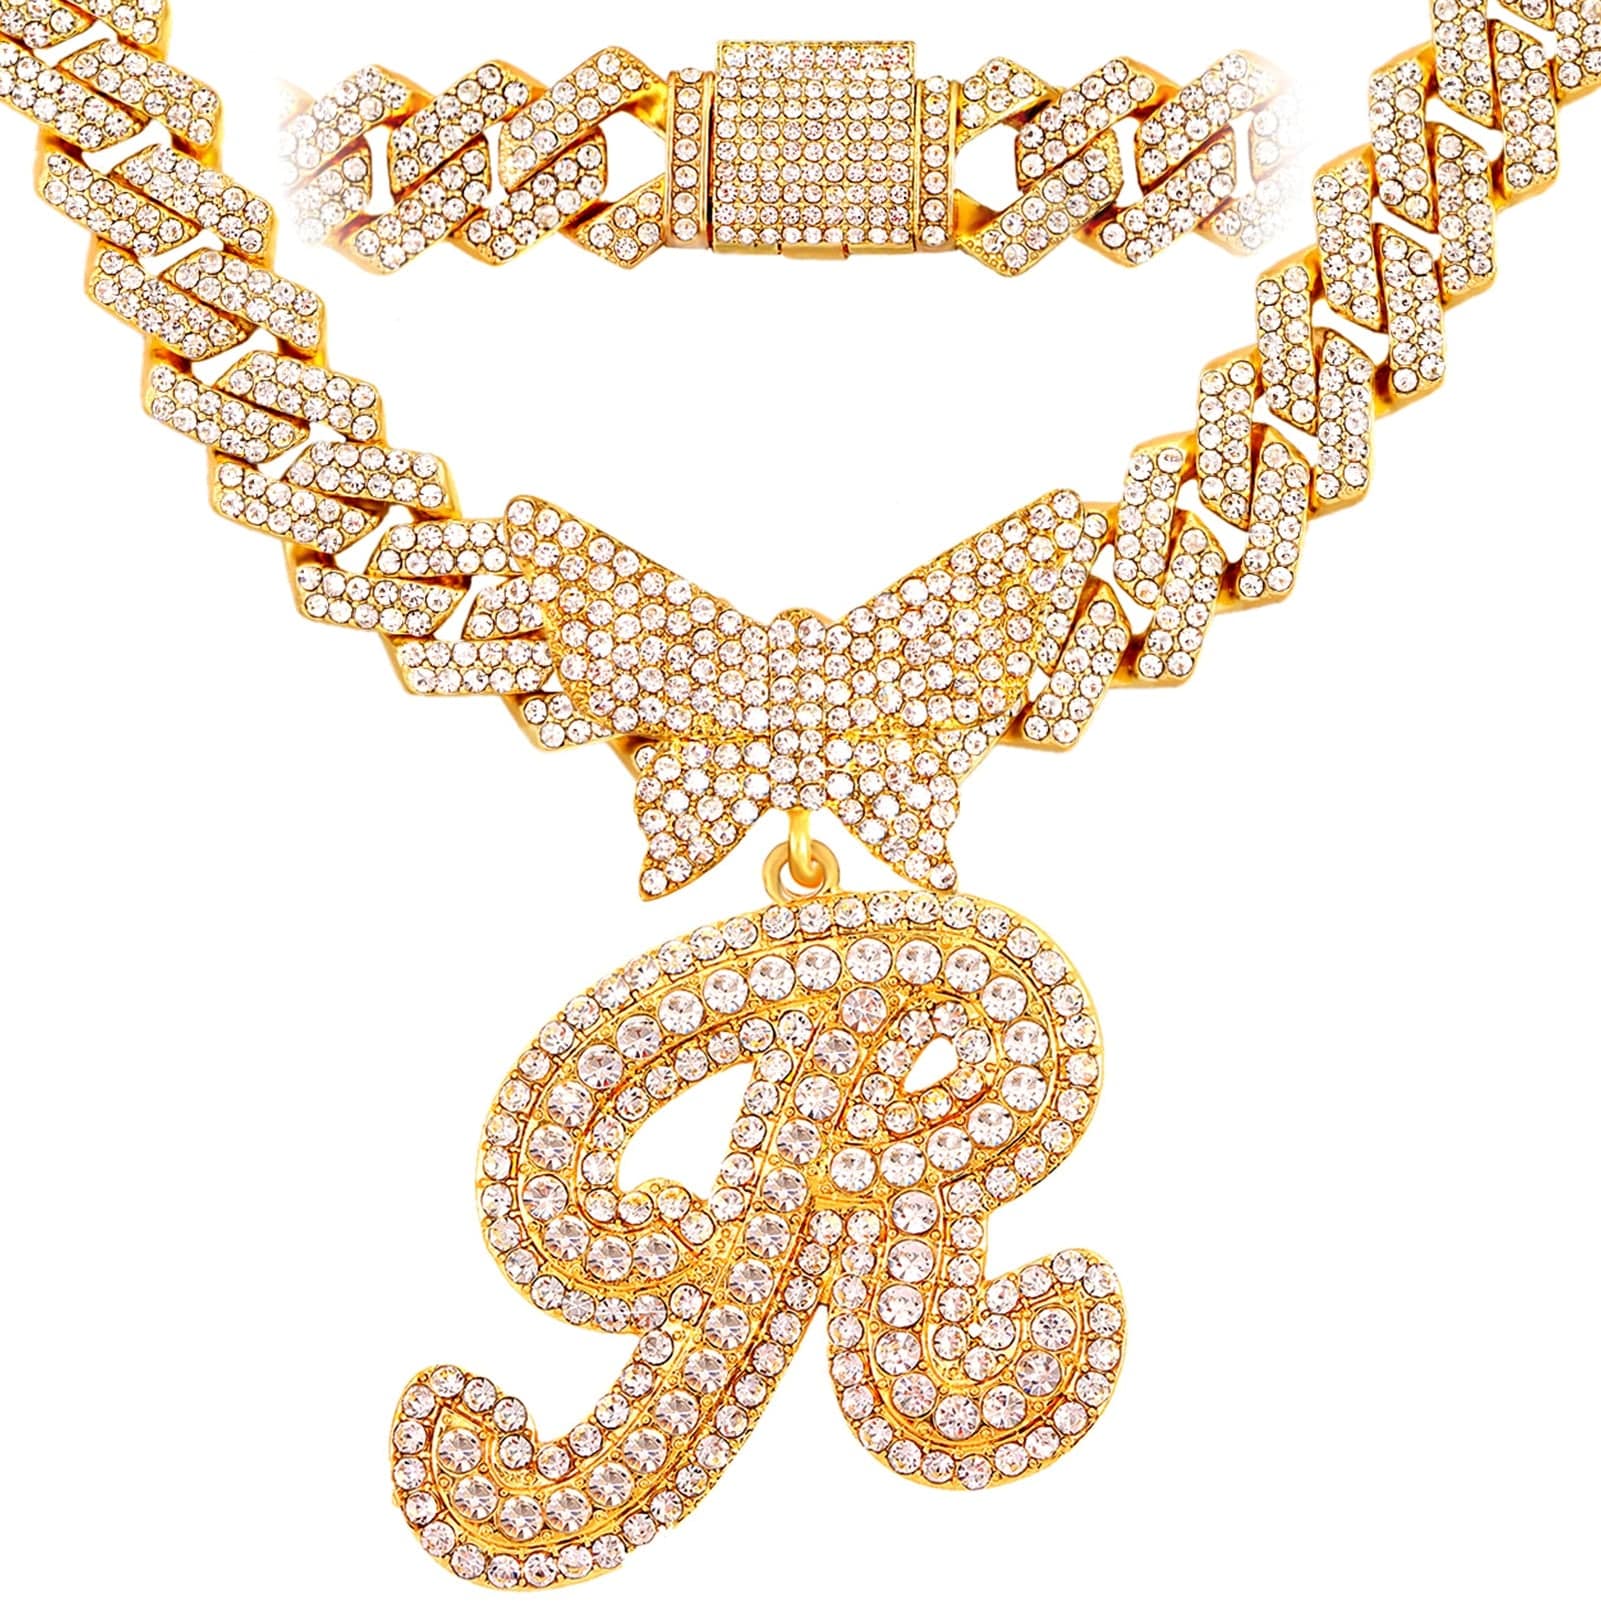 VVS Jewelry hip hop jewelry R / Gold Bling Butterfly Letter Cuban Link Chain